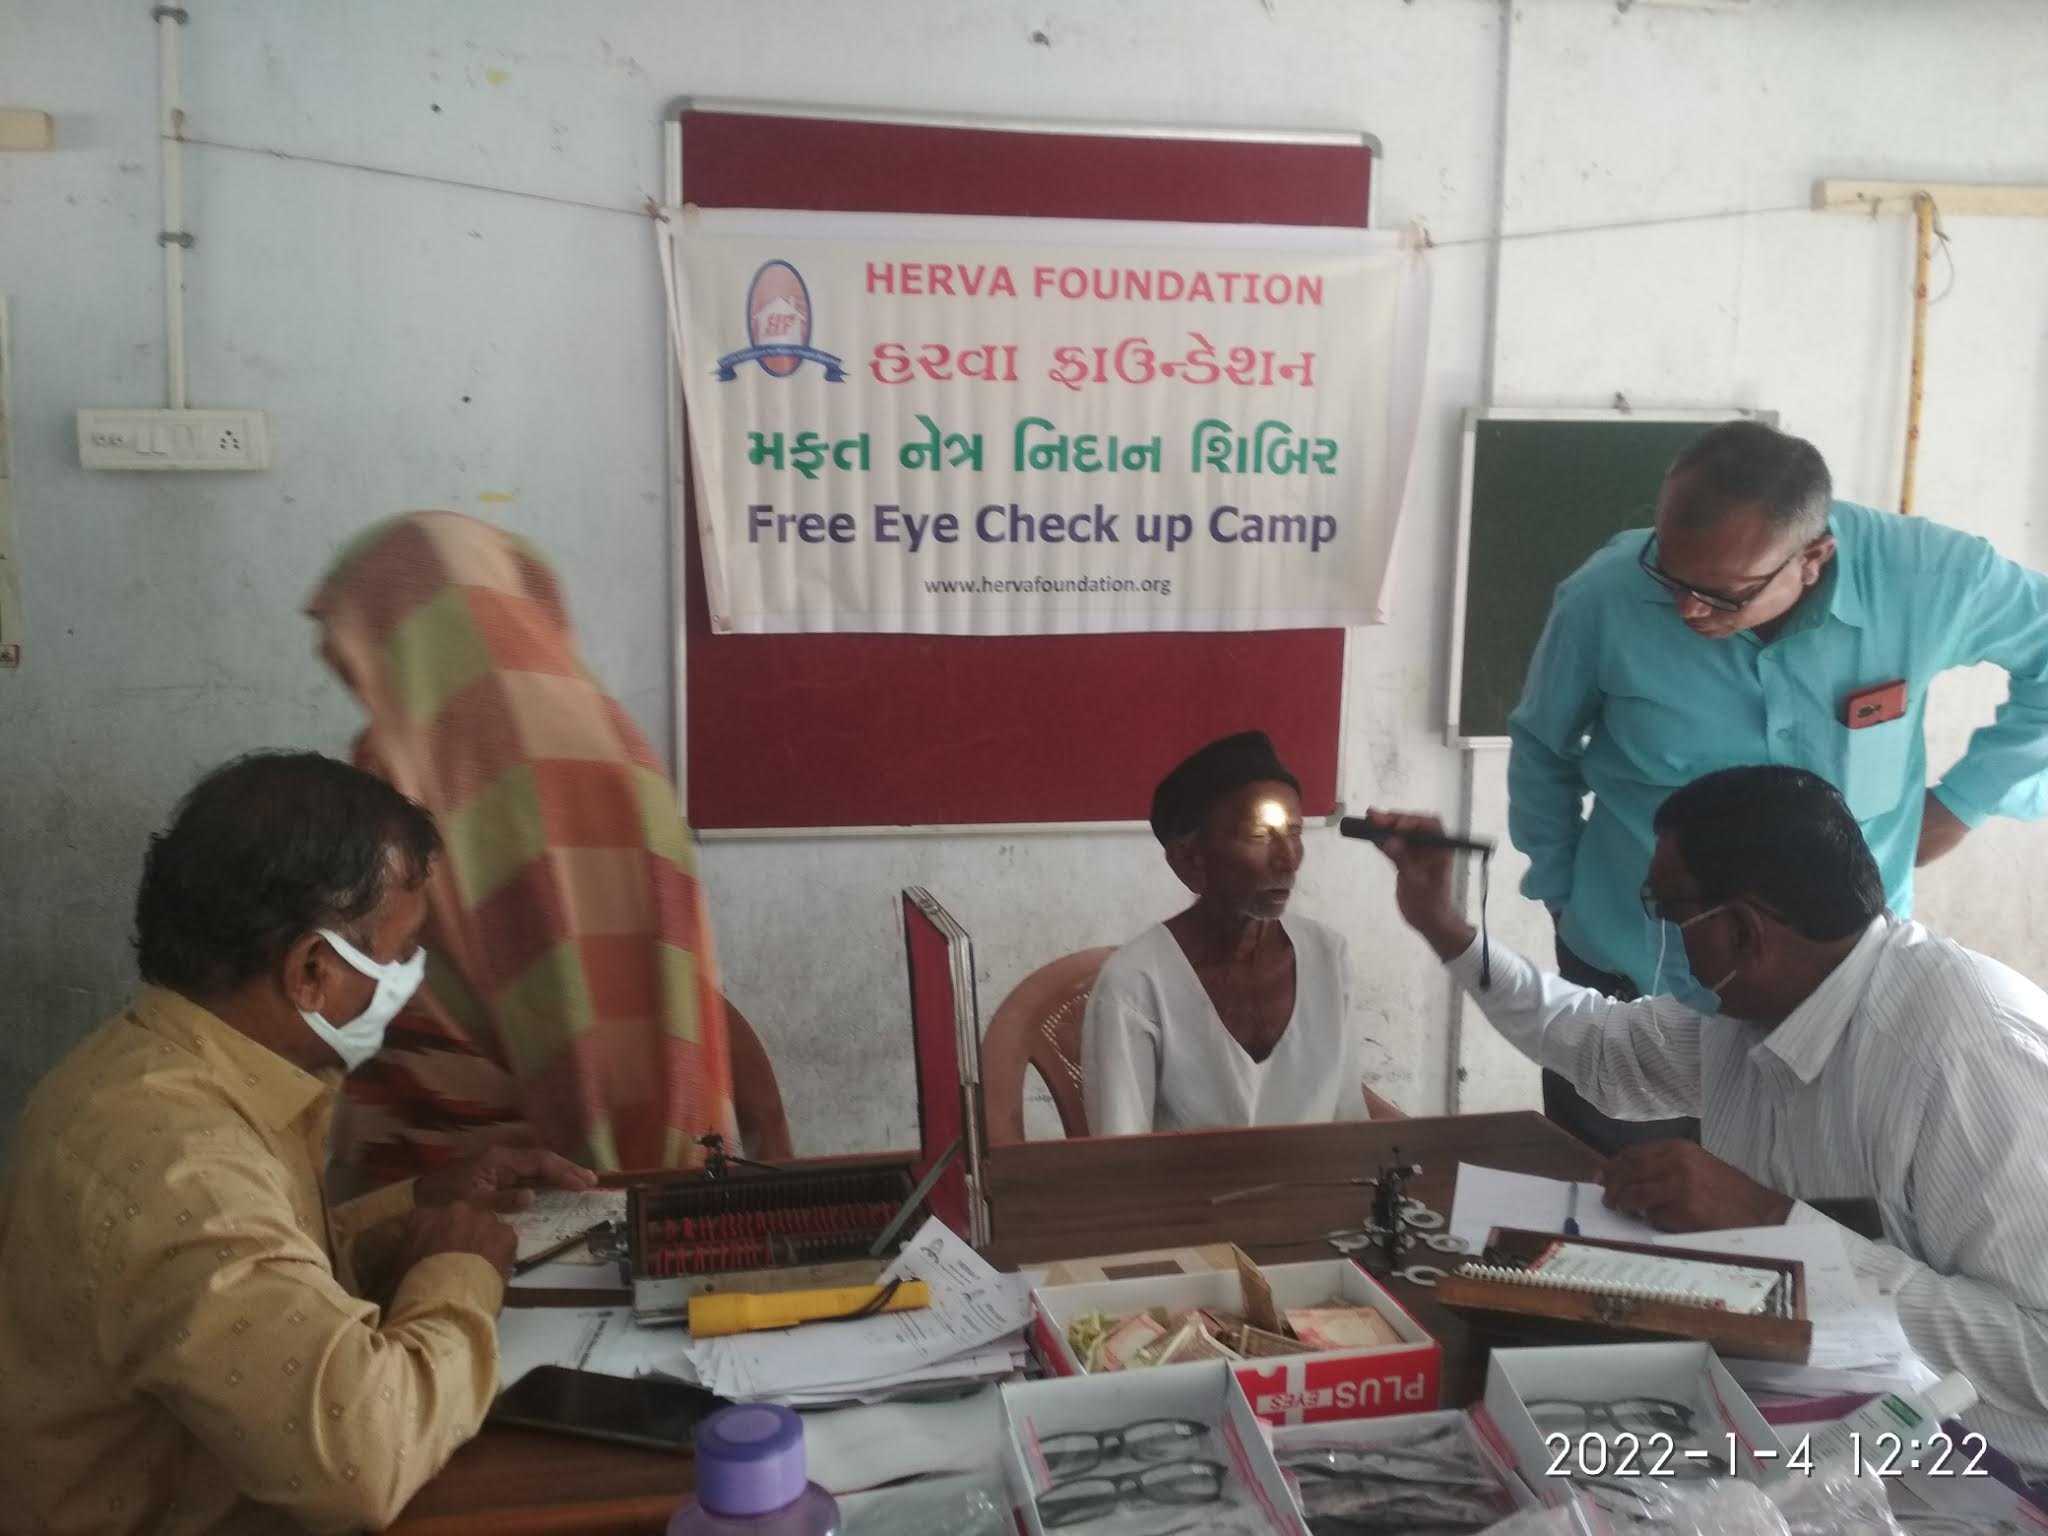 On  04.01.2022 we had successful Eye Check Up and i Breast Screening camp at Village Ghoda, taluka Viramgam Gujarat.
In the Eye Camp total 190 villagers participated (88 males and 102 females) of which 60 were senior citizens (22 male and 38 female). We gave away 115 spectacles to the those who required specks. 21 persons required cataract operation and have been referred to the nearest hospital. The spectacles were sponsored by R.Kumar Ahmedabad
In i-Breast, with the help of Health and Care Foundation, Ahmedabad screened 25 females for  early detection of Breast Cancer by i-Breast Exam with a portable device and provide immediate report.
Present and past sarpanch were present. We thank to Dr A.K. Patel and Dr.D. A. Patel for Eye camp. 